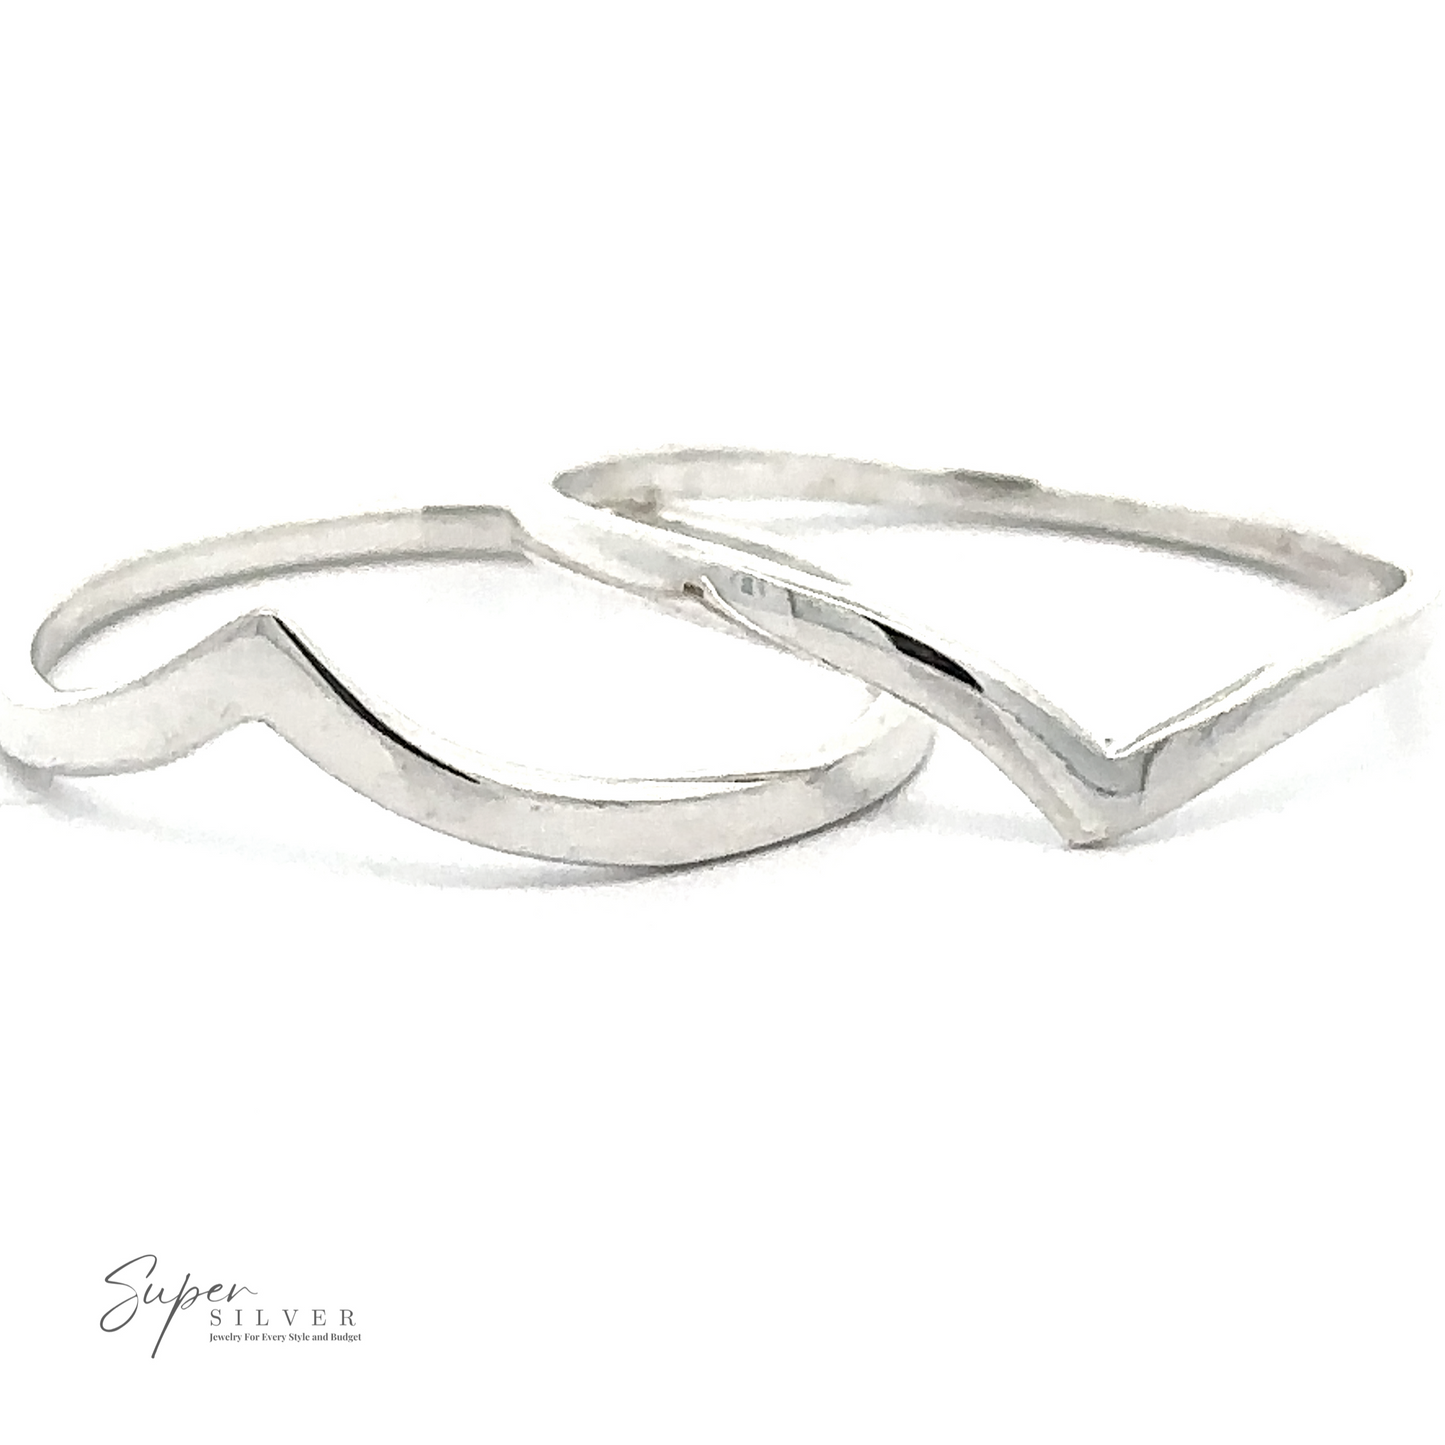 Two minimalist .925 Sterling Silver rings, one showcasing a wavy design and the other a Delicate Silver Chevron Ring, positioned side by side on a white background. The text "Super Silver" is visible in the bottom left corner, embodying modern minimalism.